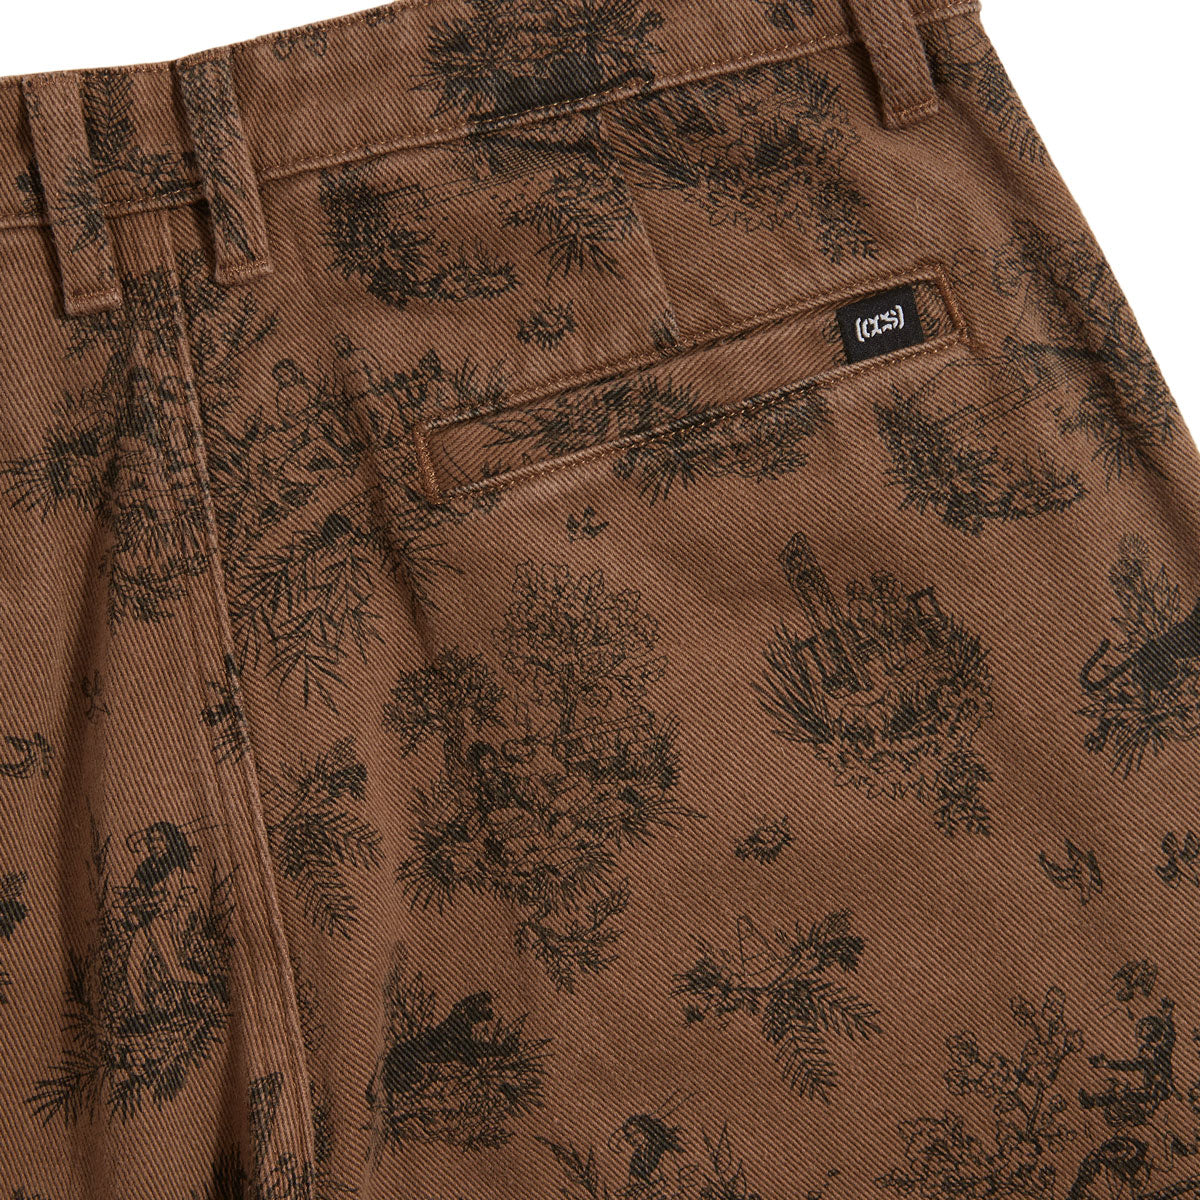 CCS Original Relaxed Toile Chino Pants - Brown Root image 6